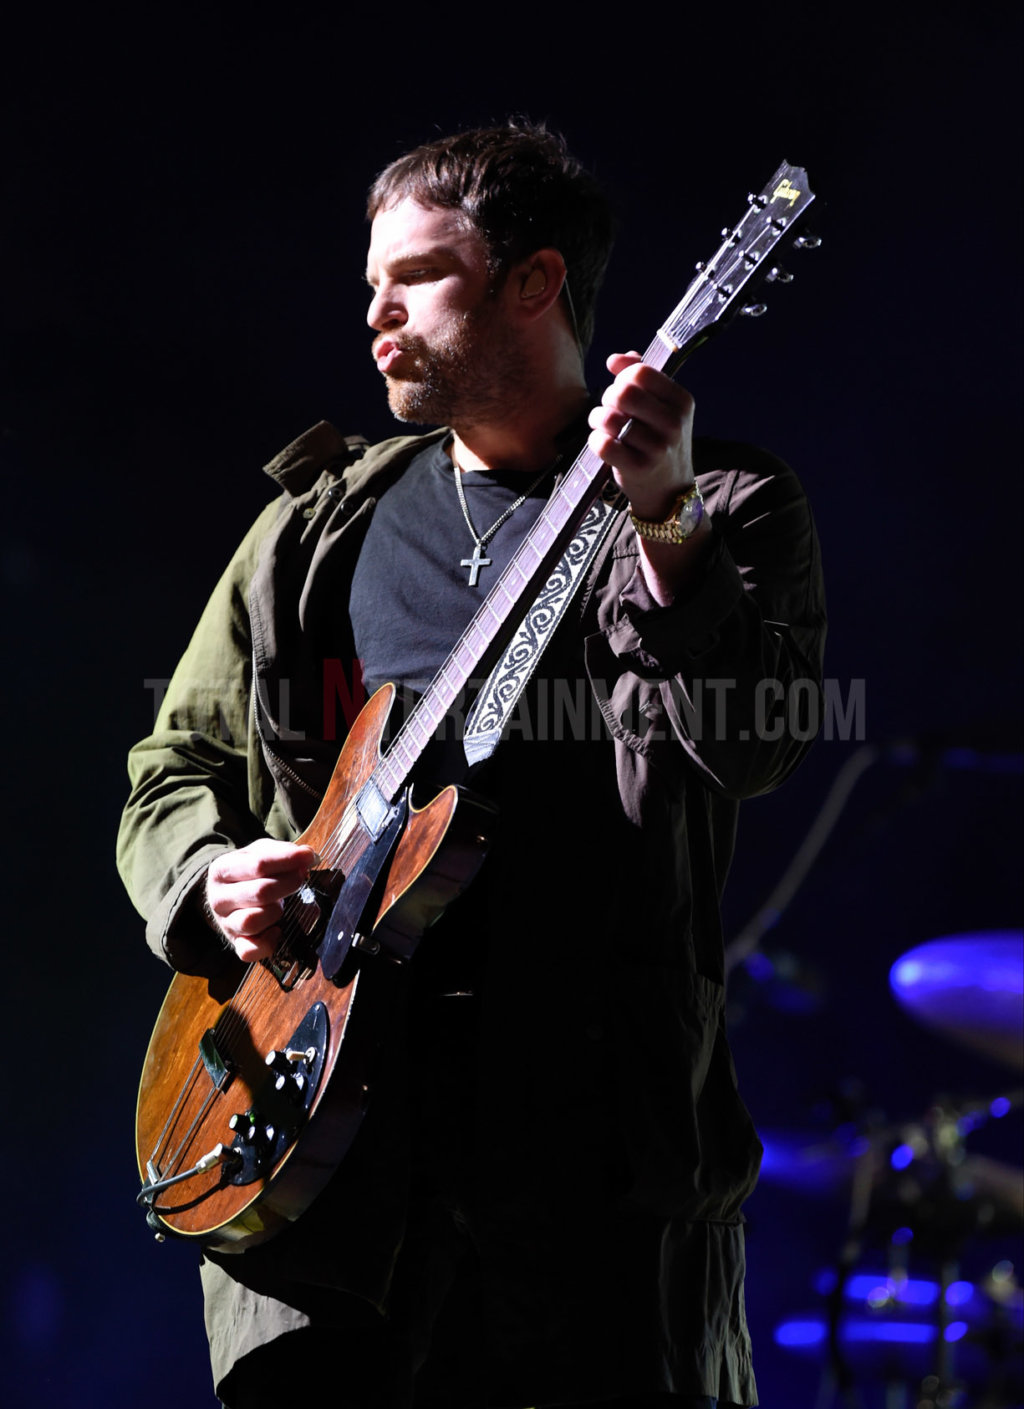 Kings of Leon, Fusion Festival, Music, Liverpool, Jo Forrest, Review, TotalNtertainment